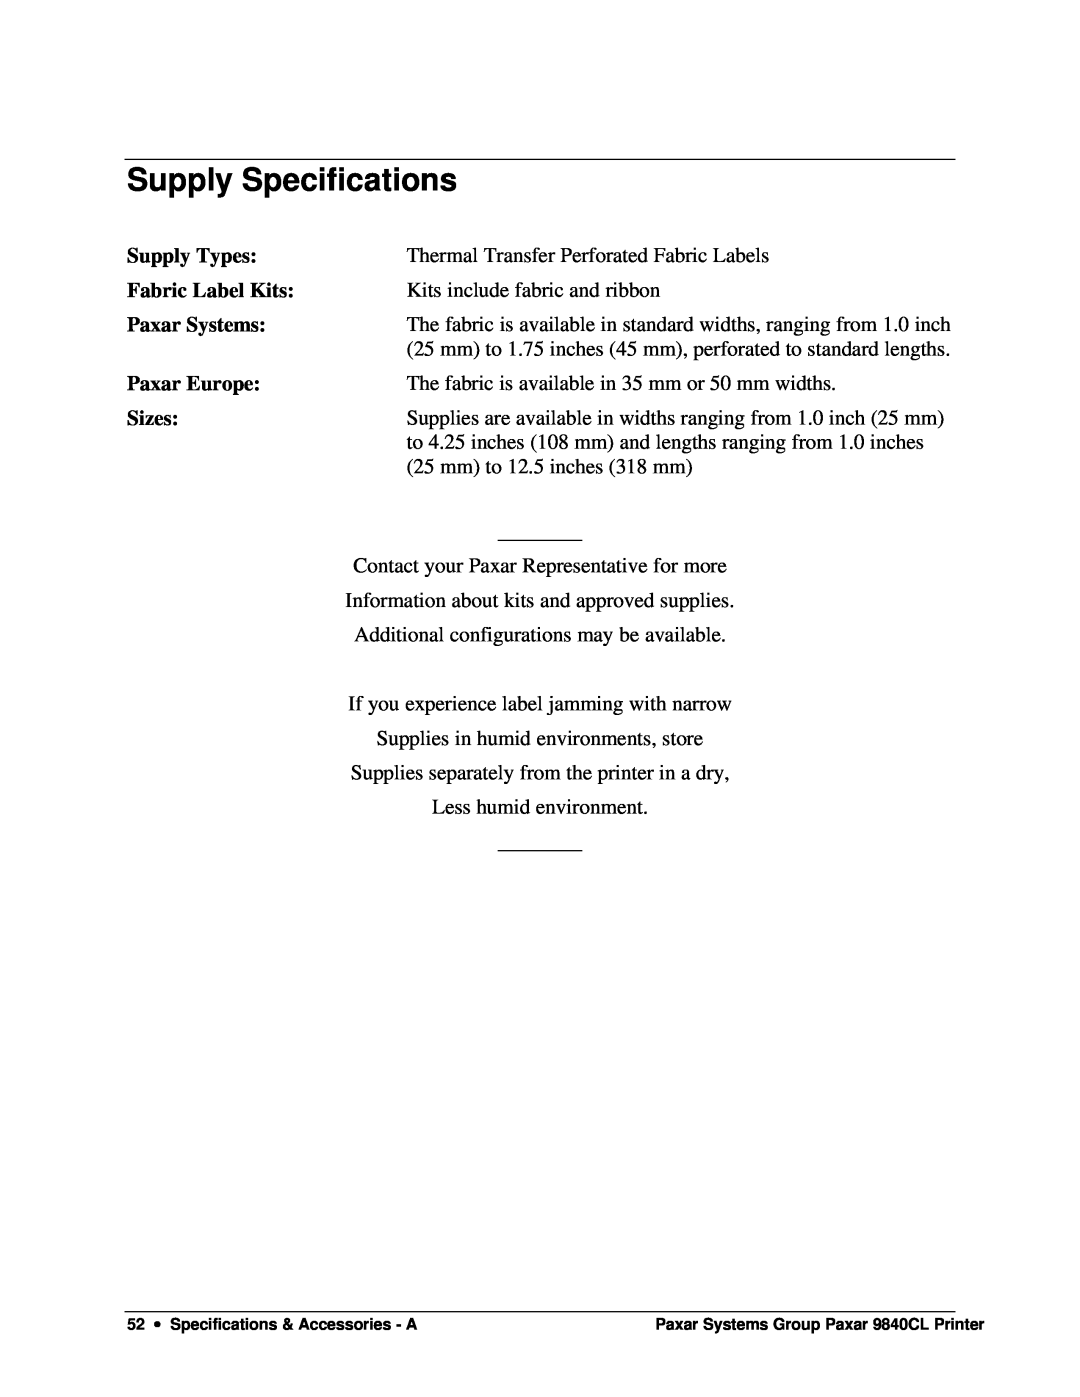 Paxar 9840CL user manual Supply Specifications, Supply Types, Fabric Label Kits, Paxar Systems, Paxar Europe, Sizes 